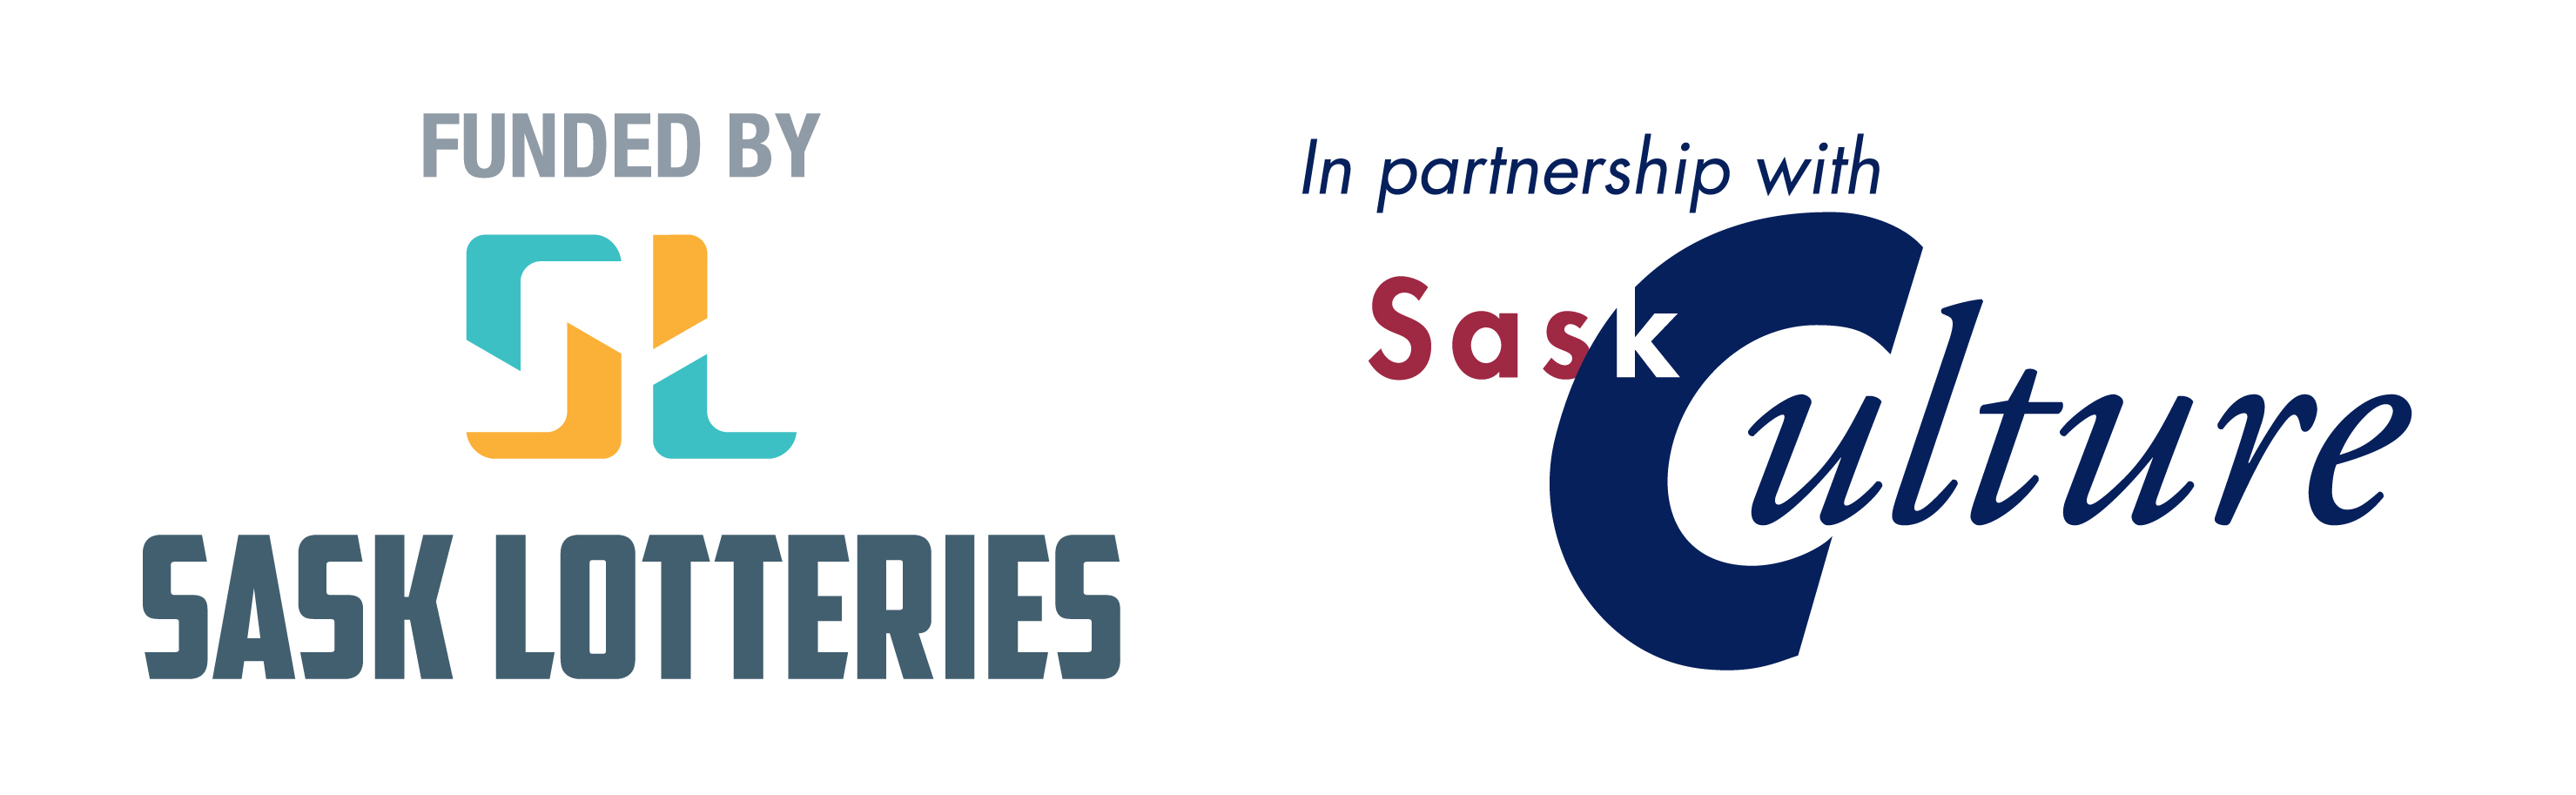 Funded by Sask Lotteries, in partnership with SaskCulture logo